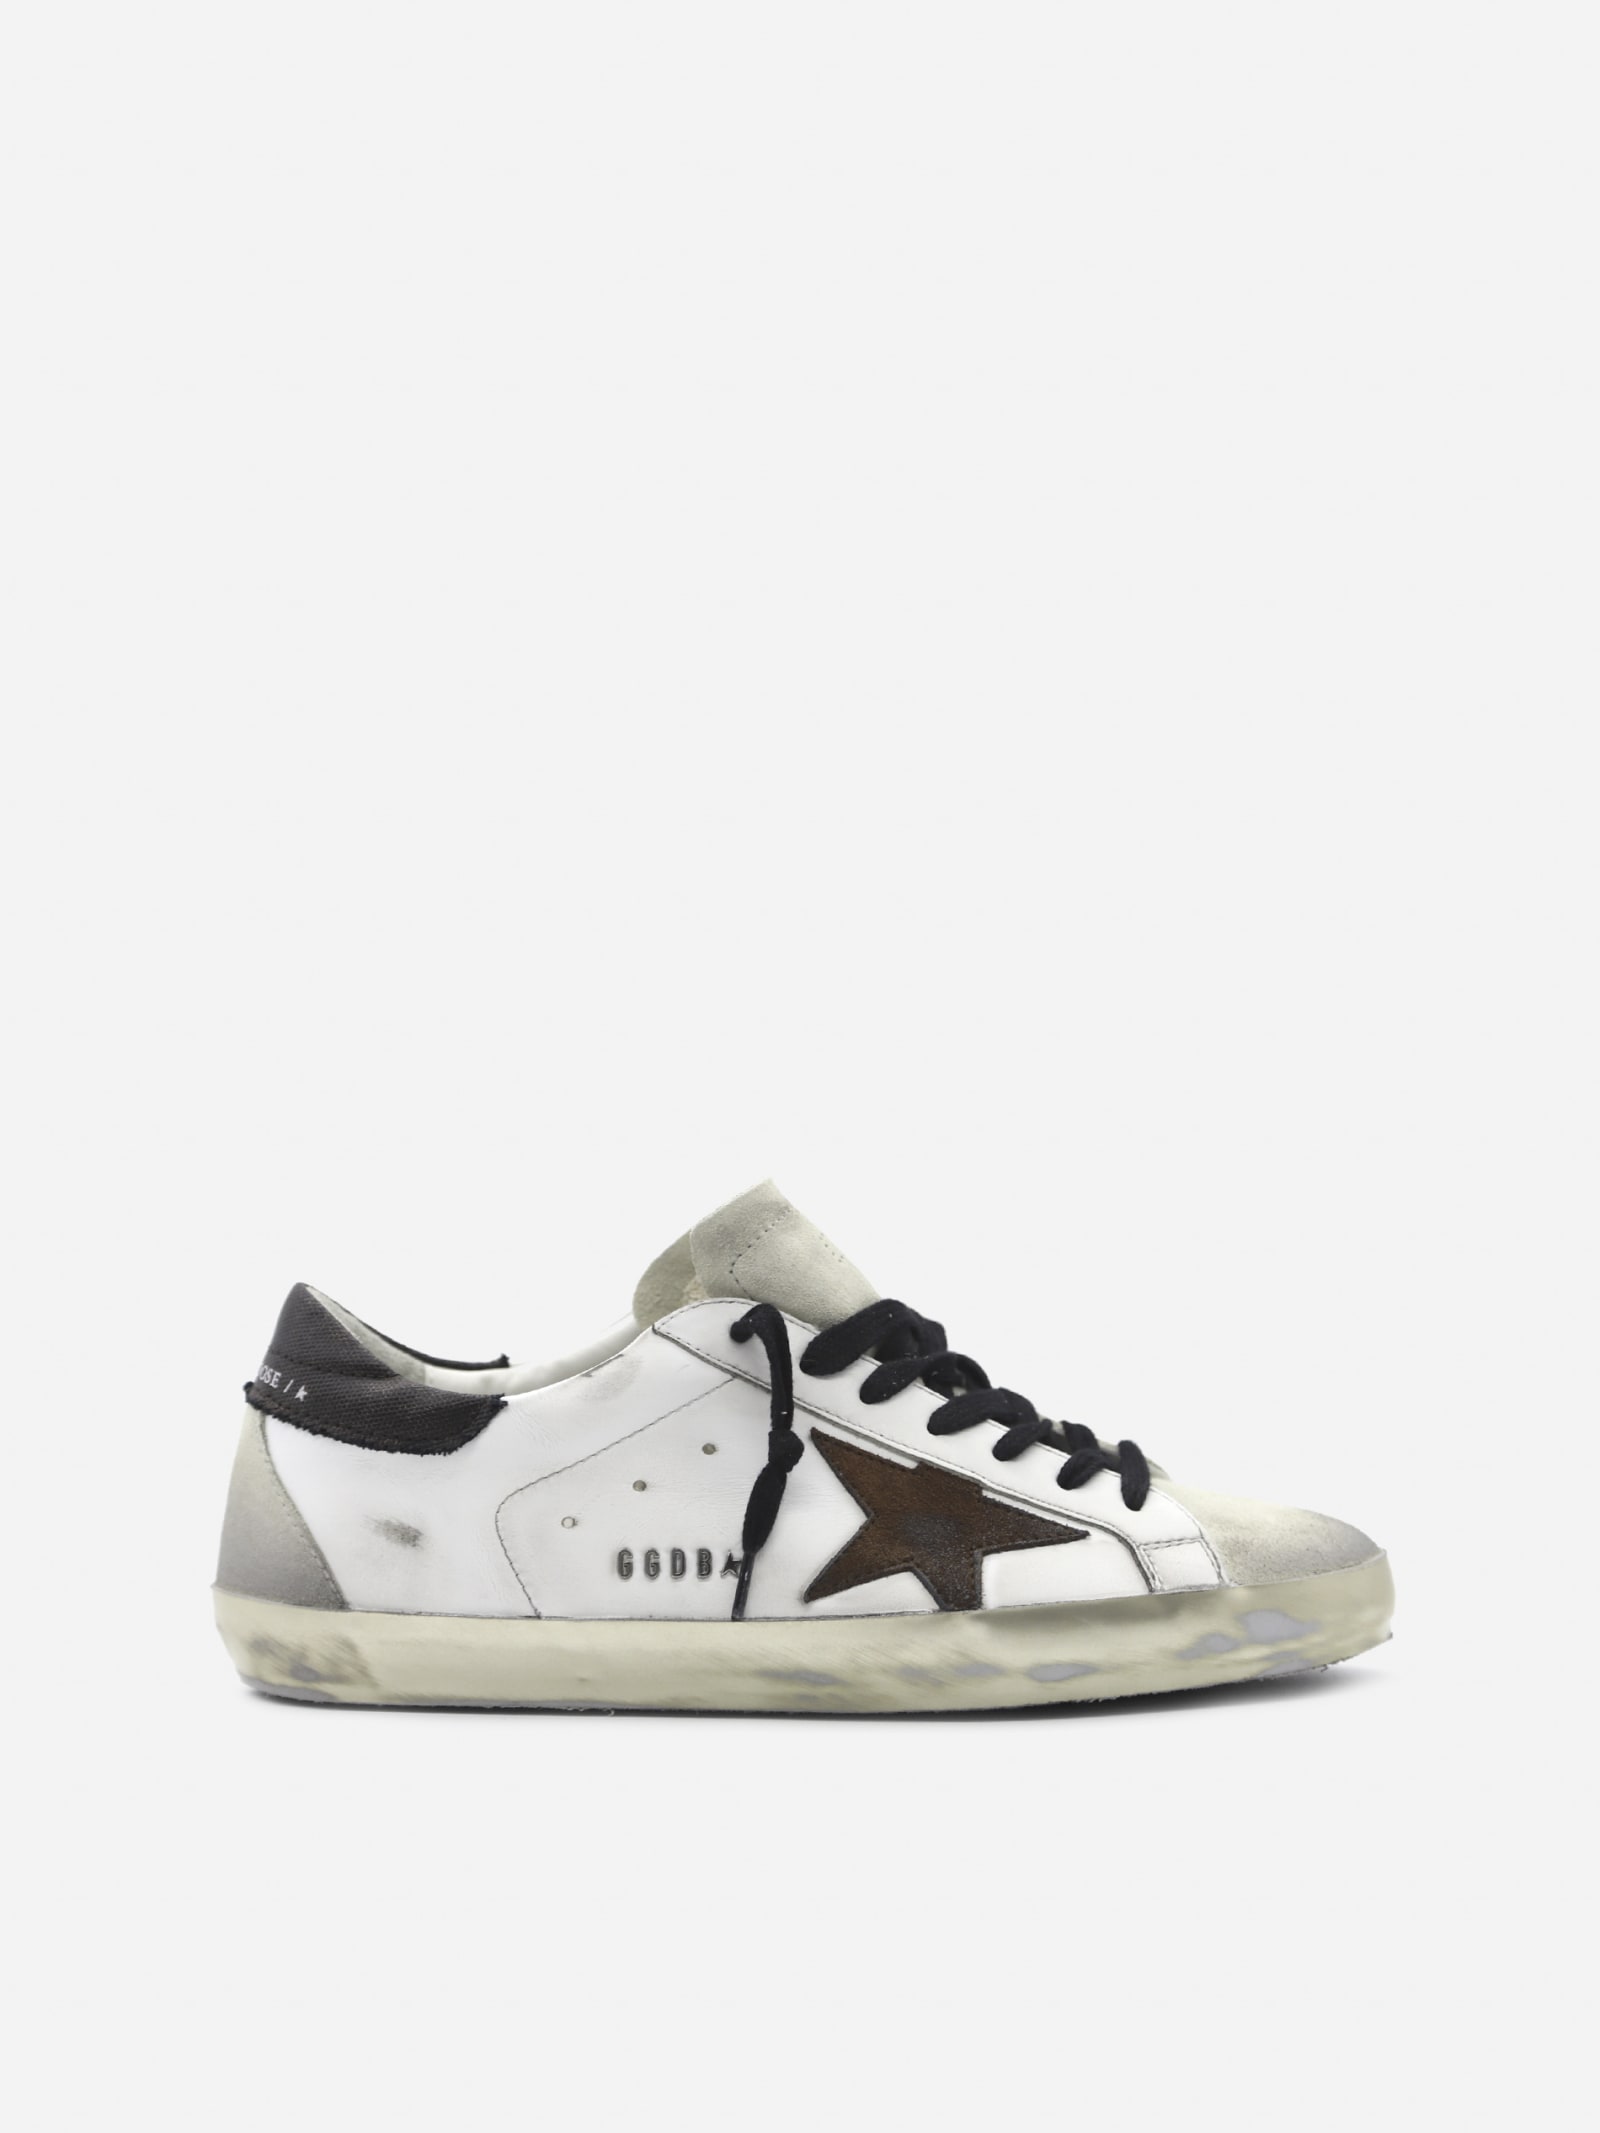 Golden Goose Superstar Sneakers In Leather With Suede Inserts